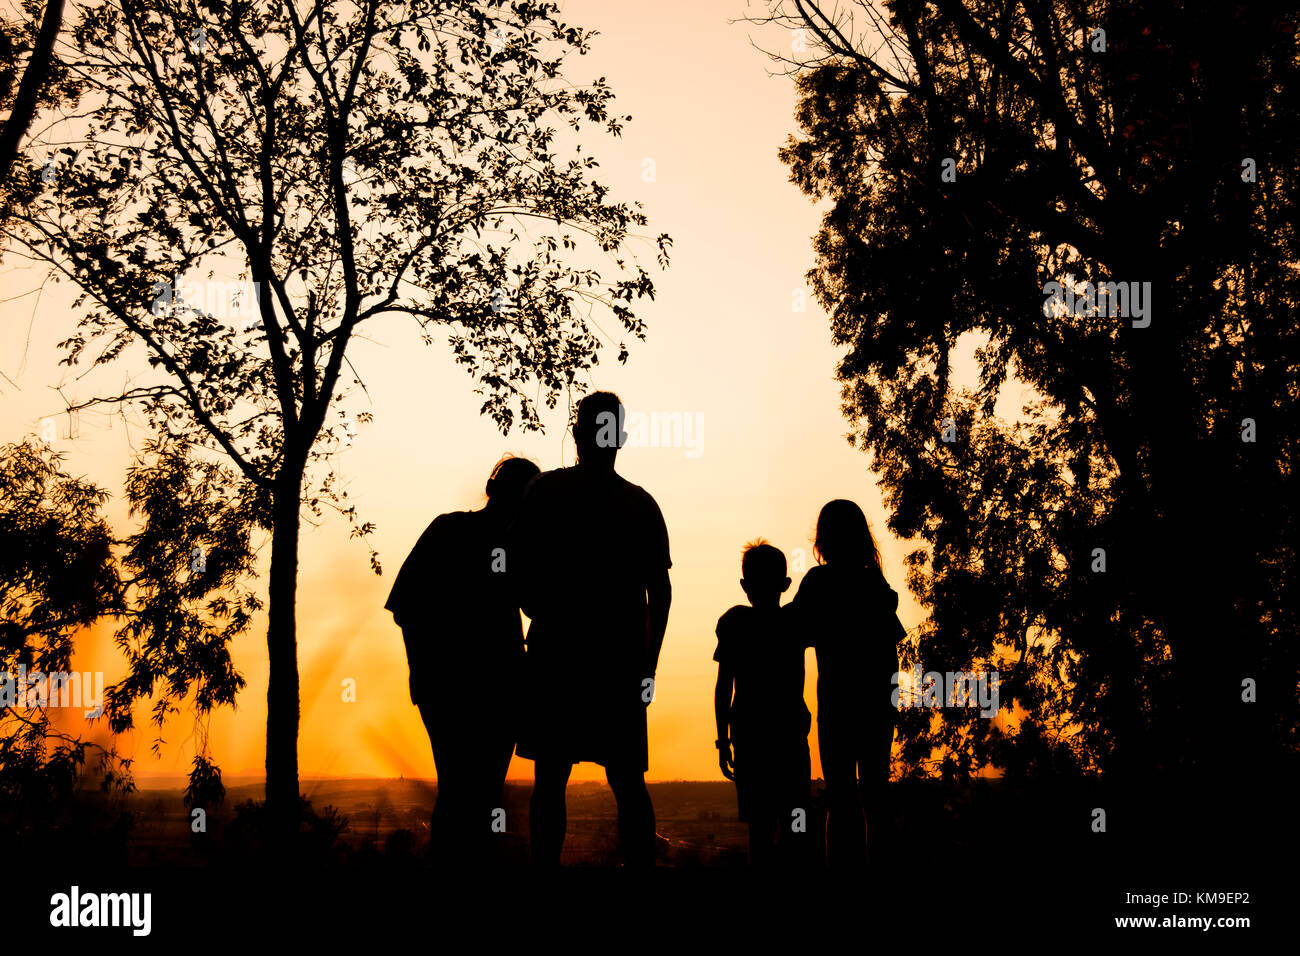 Silhouette of a family with two children holding hands at sunset Stock Photo